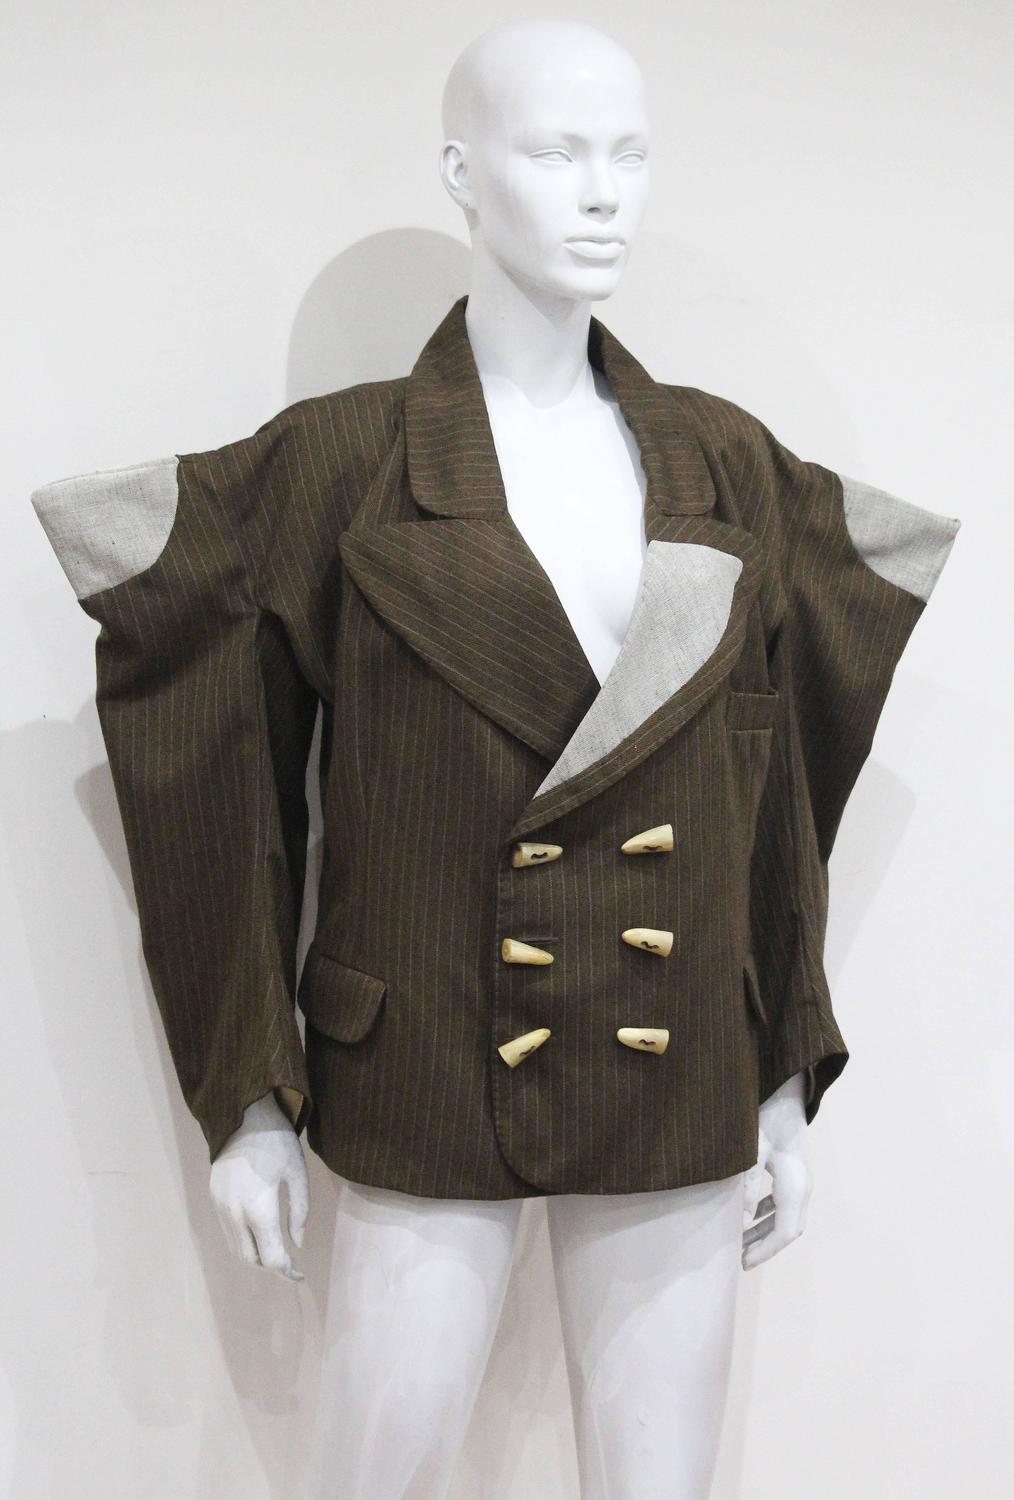 World's End by Vivienne Westwood and Malcolm Mclaren 'Witches' jacket c ...